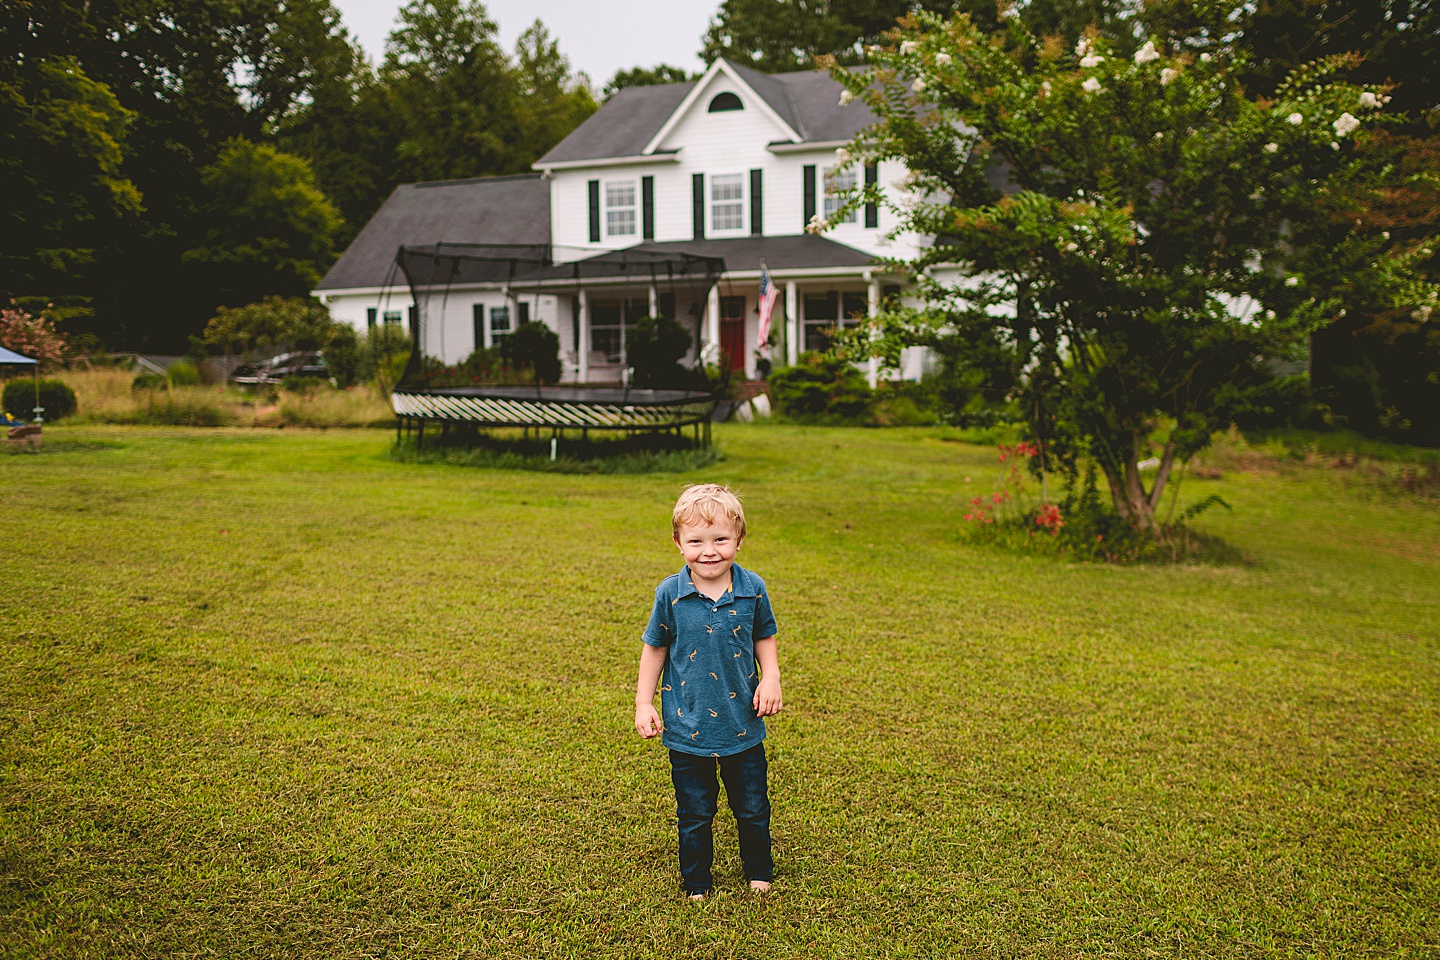 Kid standing in front of his house with trampoline in the background